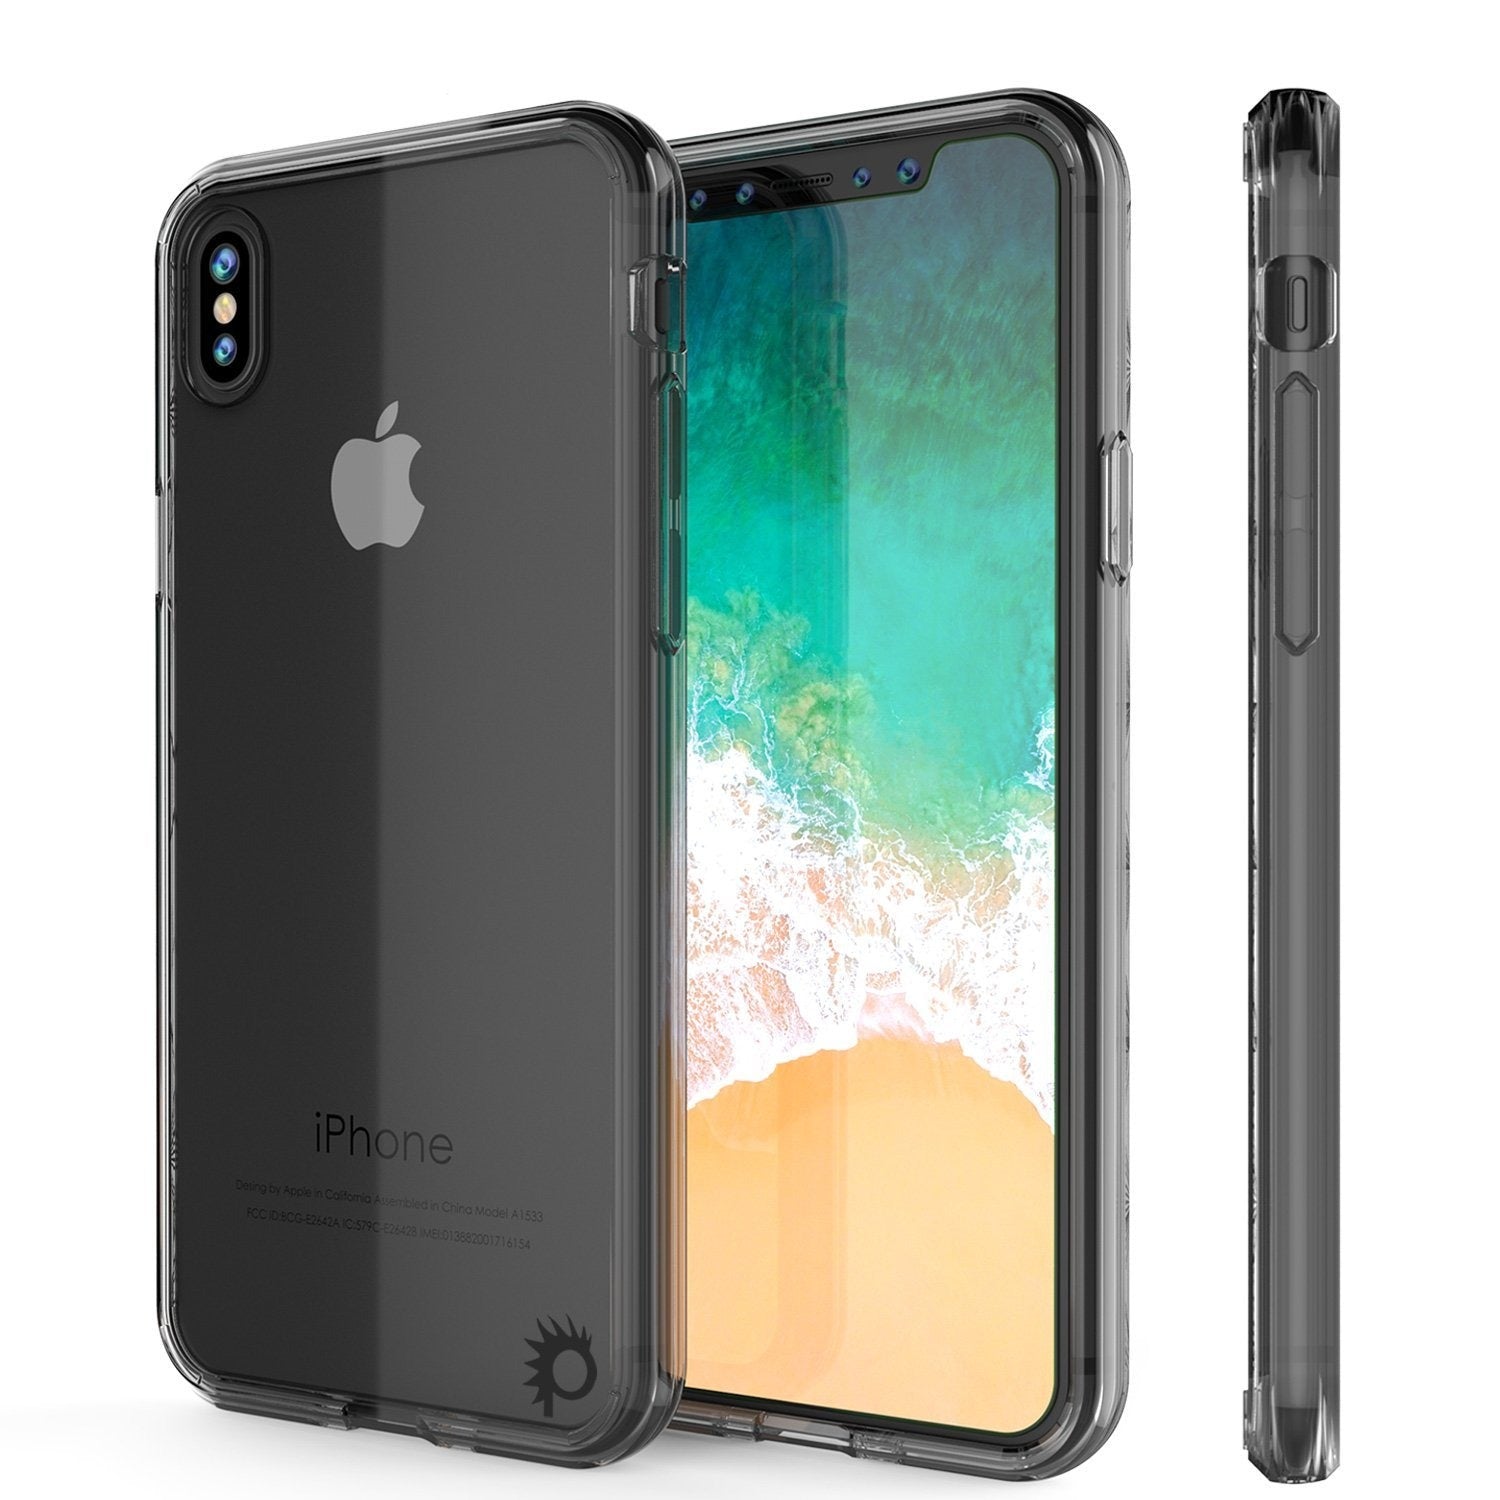 iPhone X Case, PUNKcase [LUCID 2.0 Series] [Slim Fit] Armor Cover W/Integrated Anti-Shock System [Crystal Black]